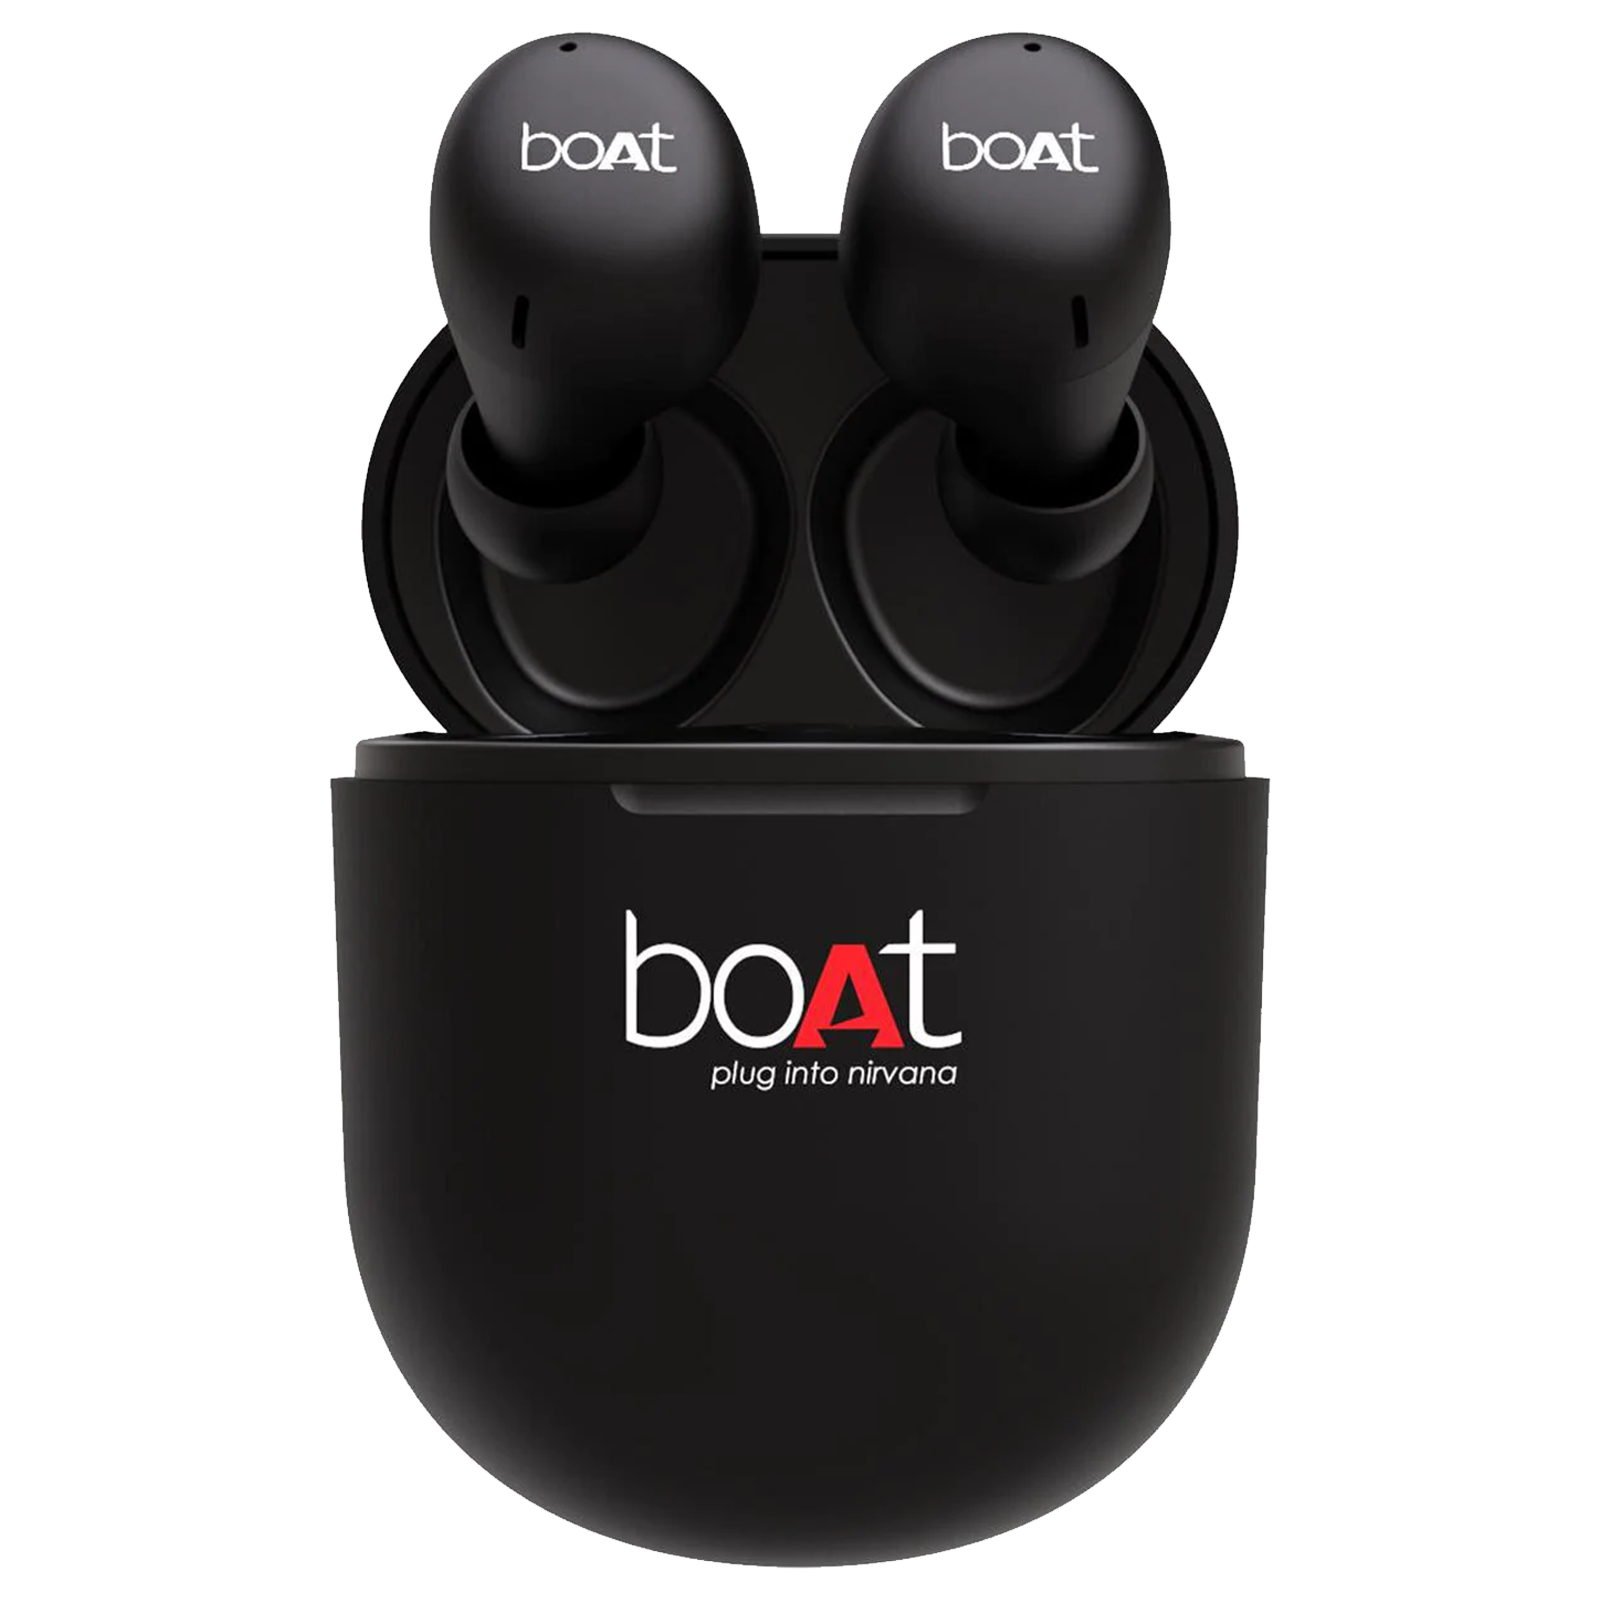 Boat - boat Airdopes In-Ear Truly Wireless Earbuds with Mic (Bluetooth 5.0, 383, Black)